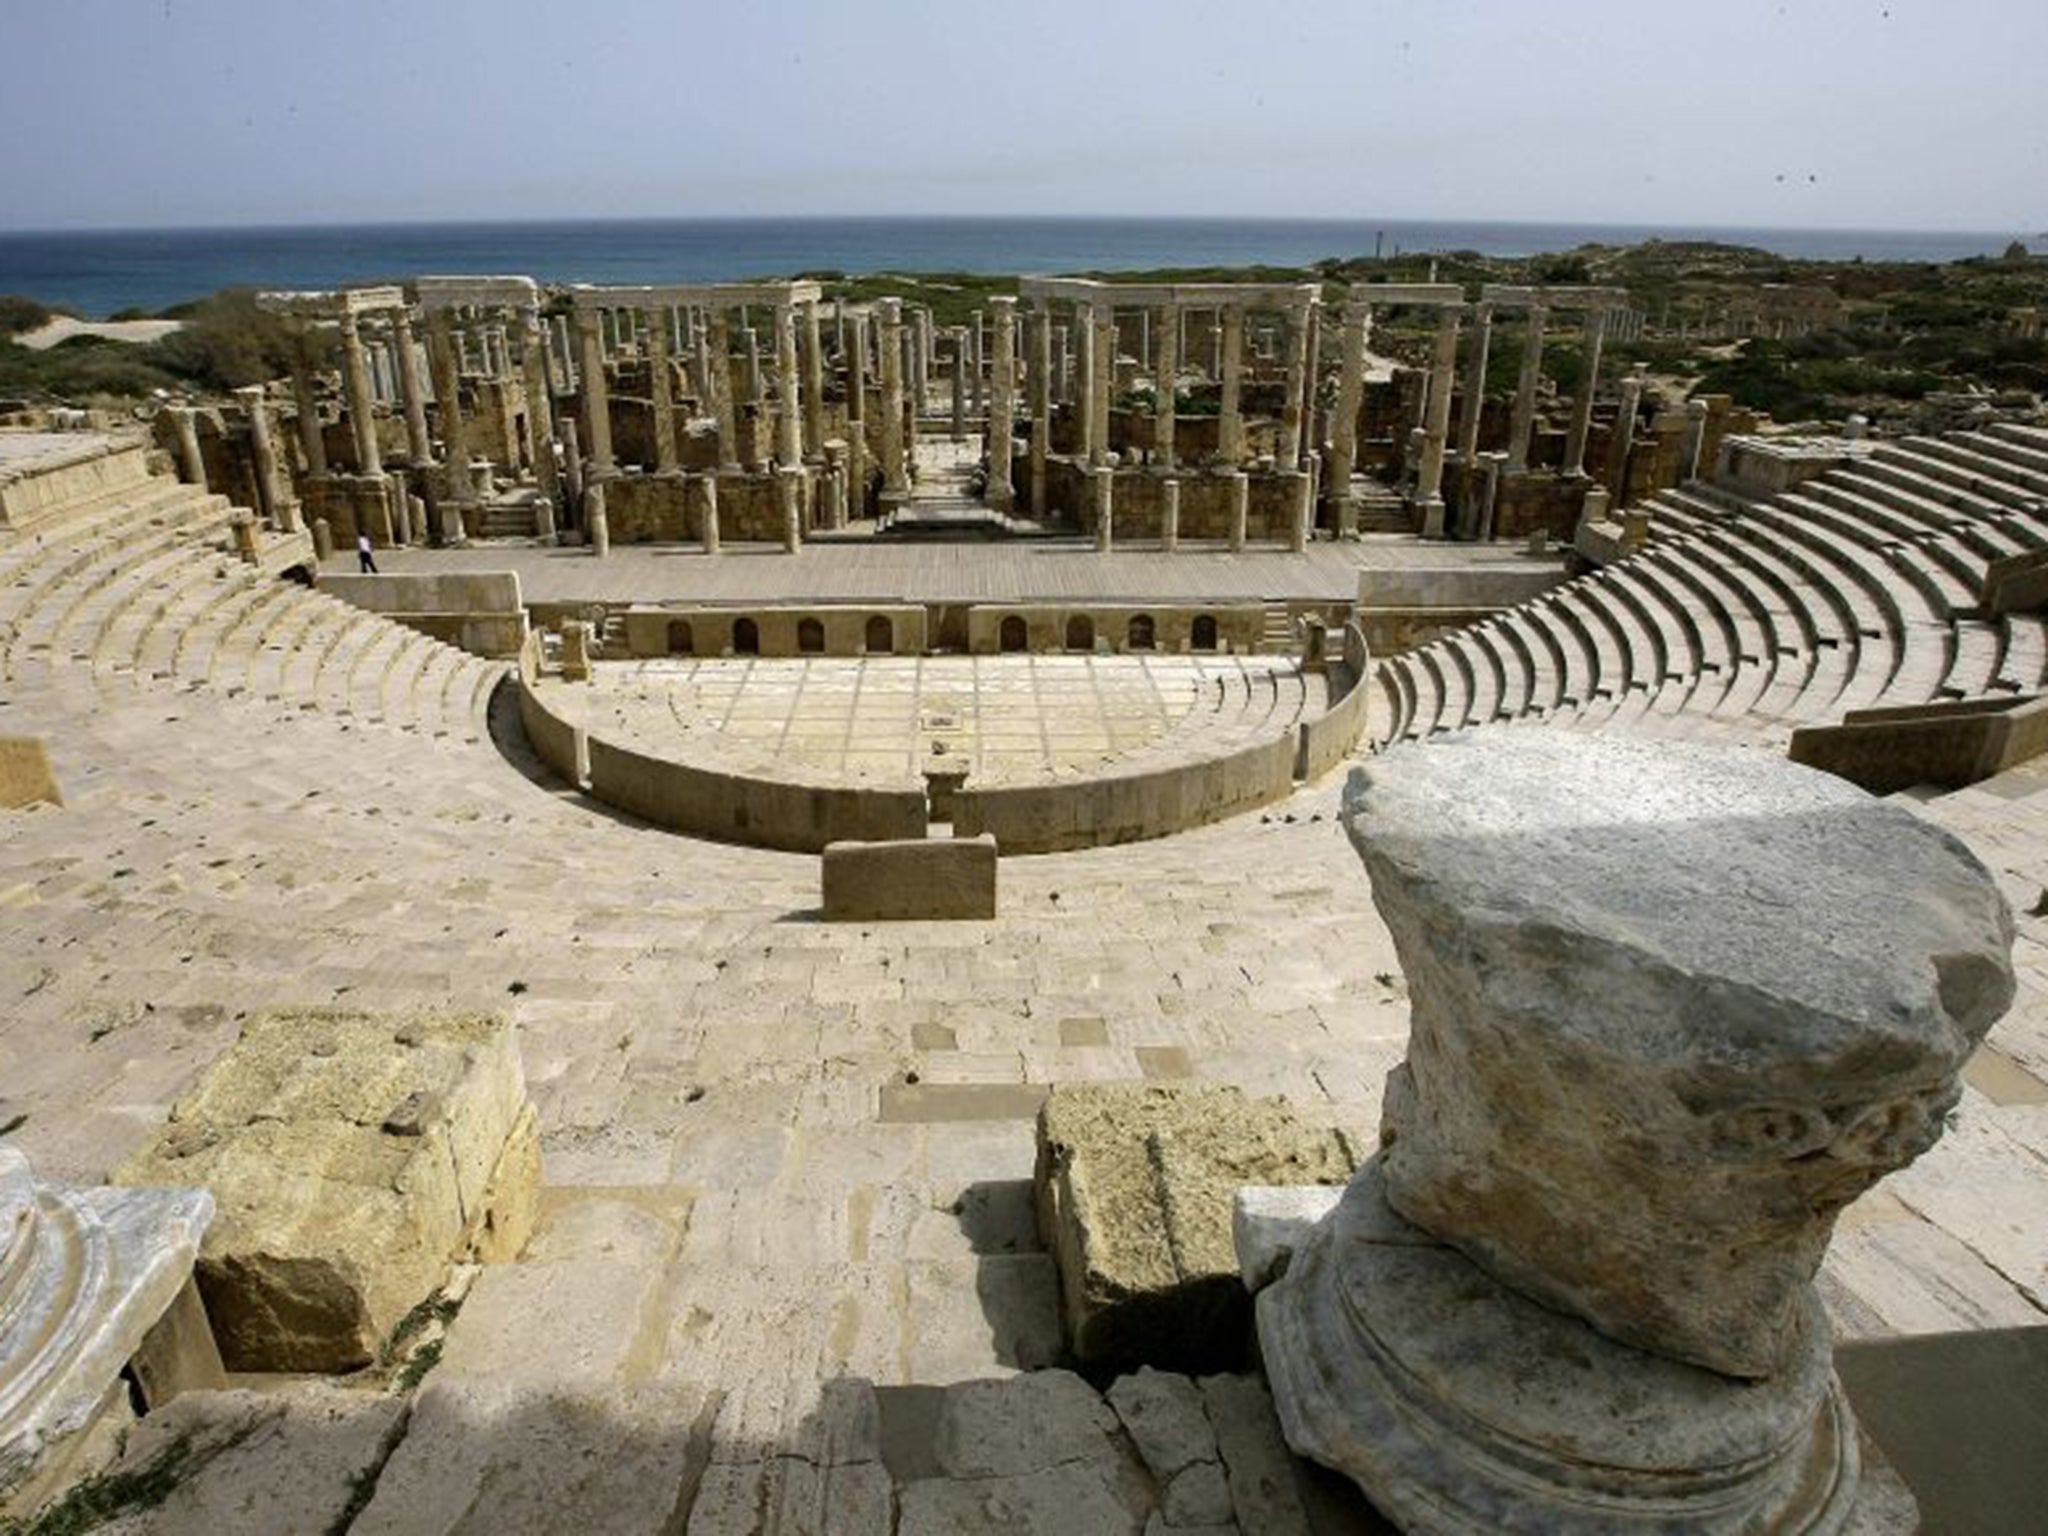 The amphitheatre at Leptis Magna, a World Heritage site in the city of Lebda. The Roman ruins are among the most spectacular in the Mediterranean.